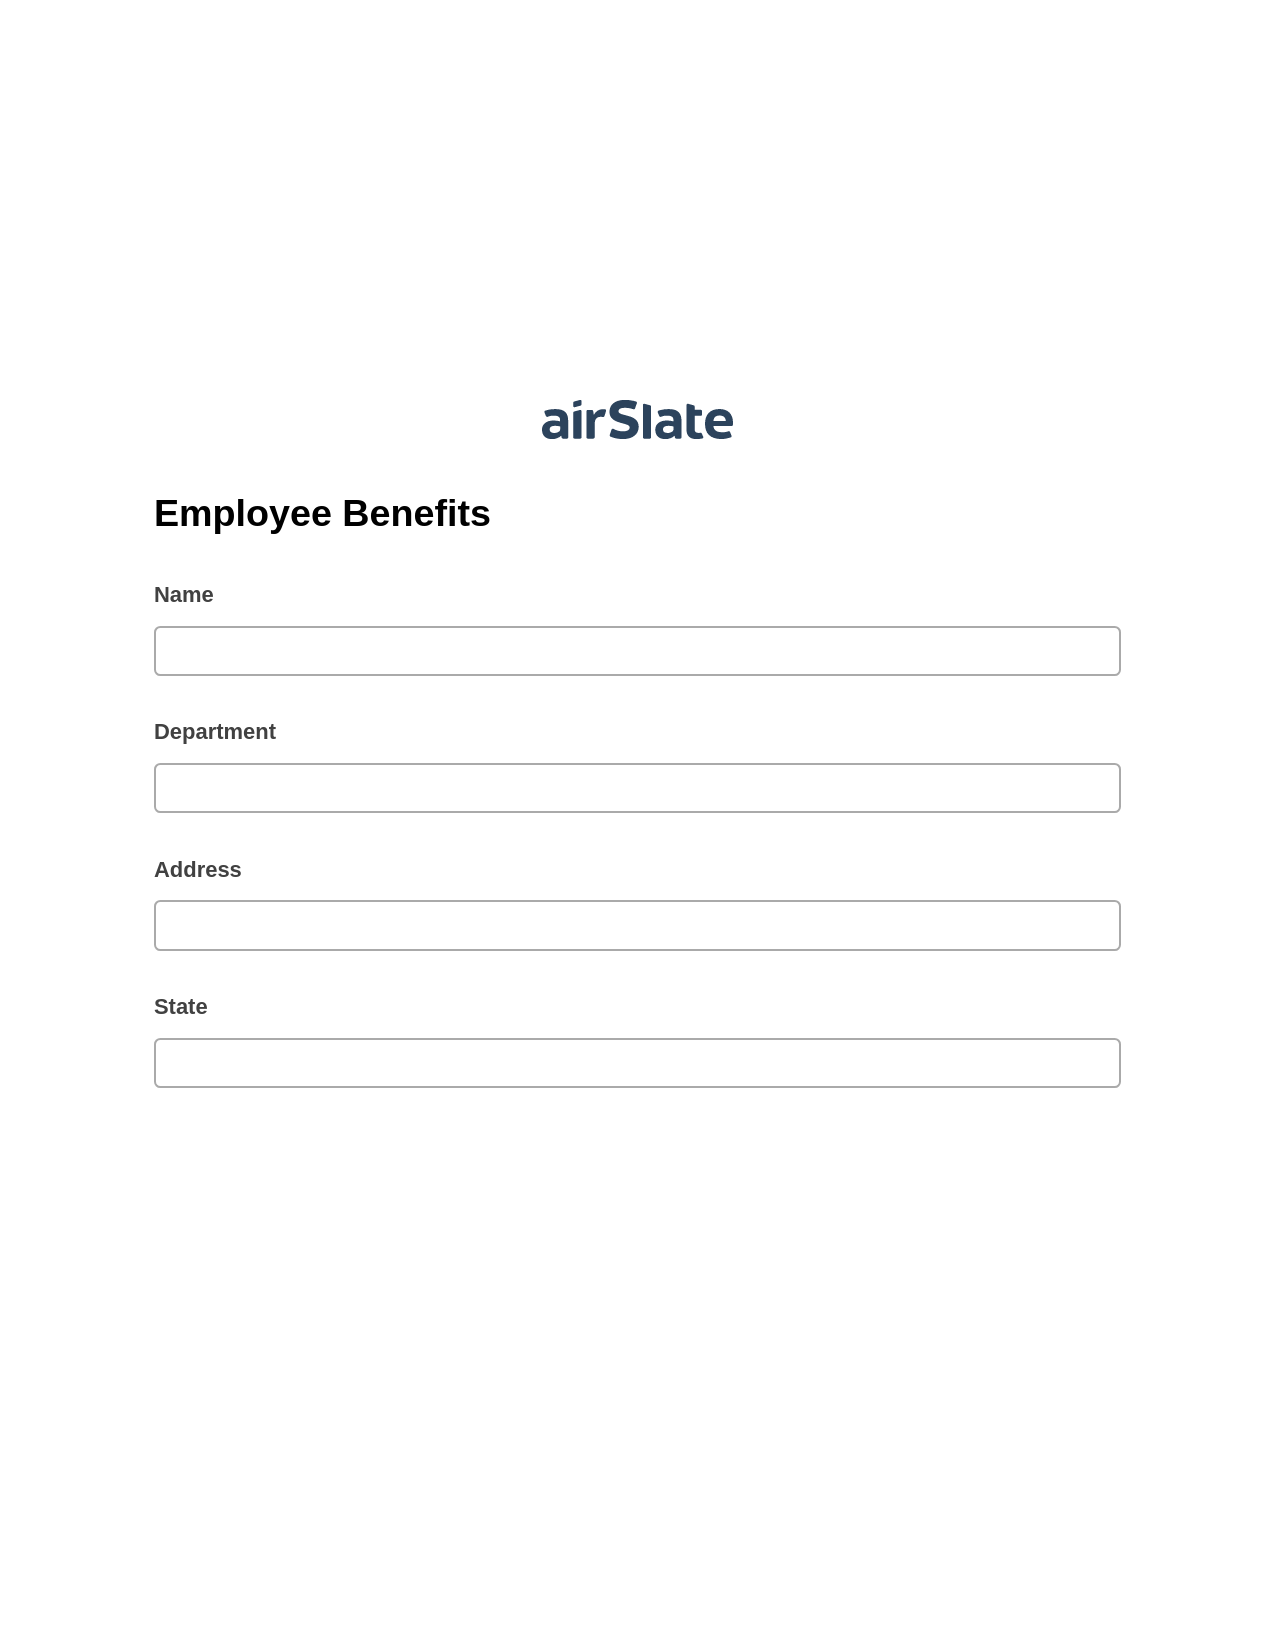 Employee Benefits Pre-fill Dropdown from Airtable, SendGrid send Campaign bot, Box Bot